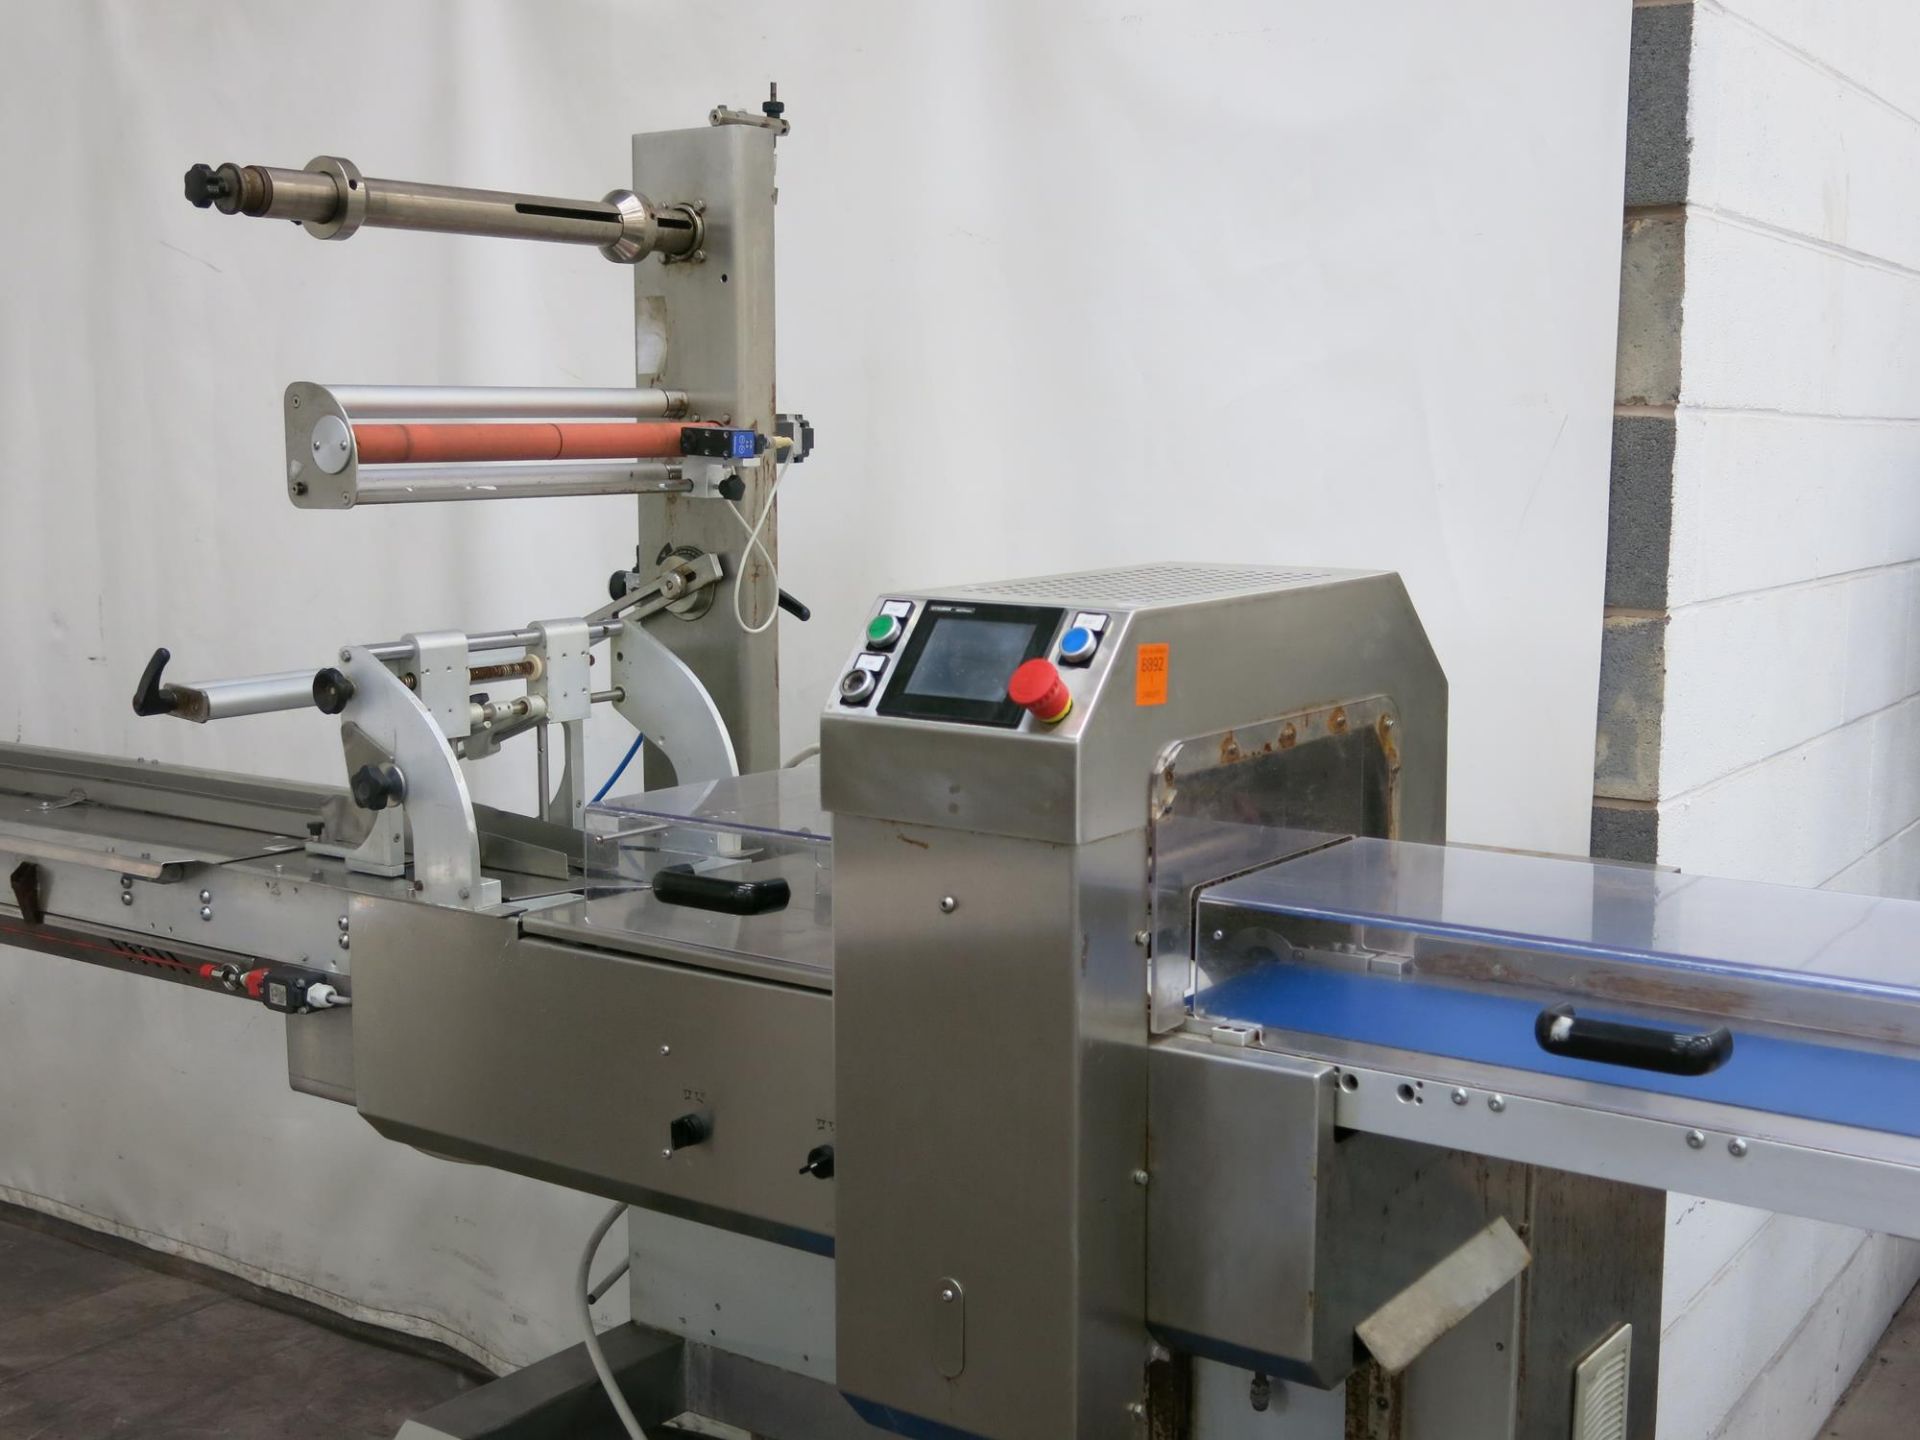 * 2014 Tisomi LMC ZA505E3 Horizontal Wrapping Machine. Serial Number: 02.227; Max Film Width - Image 4 of 12